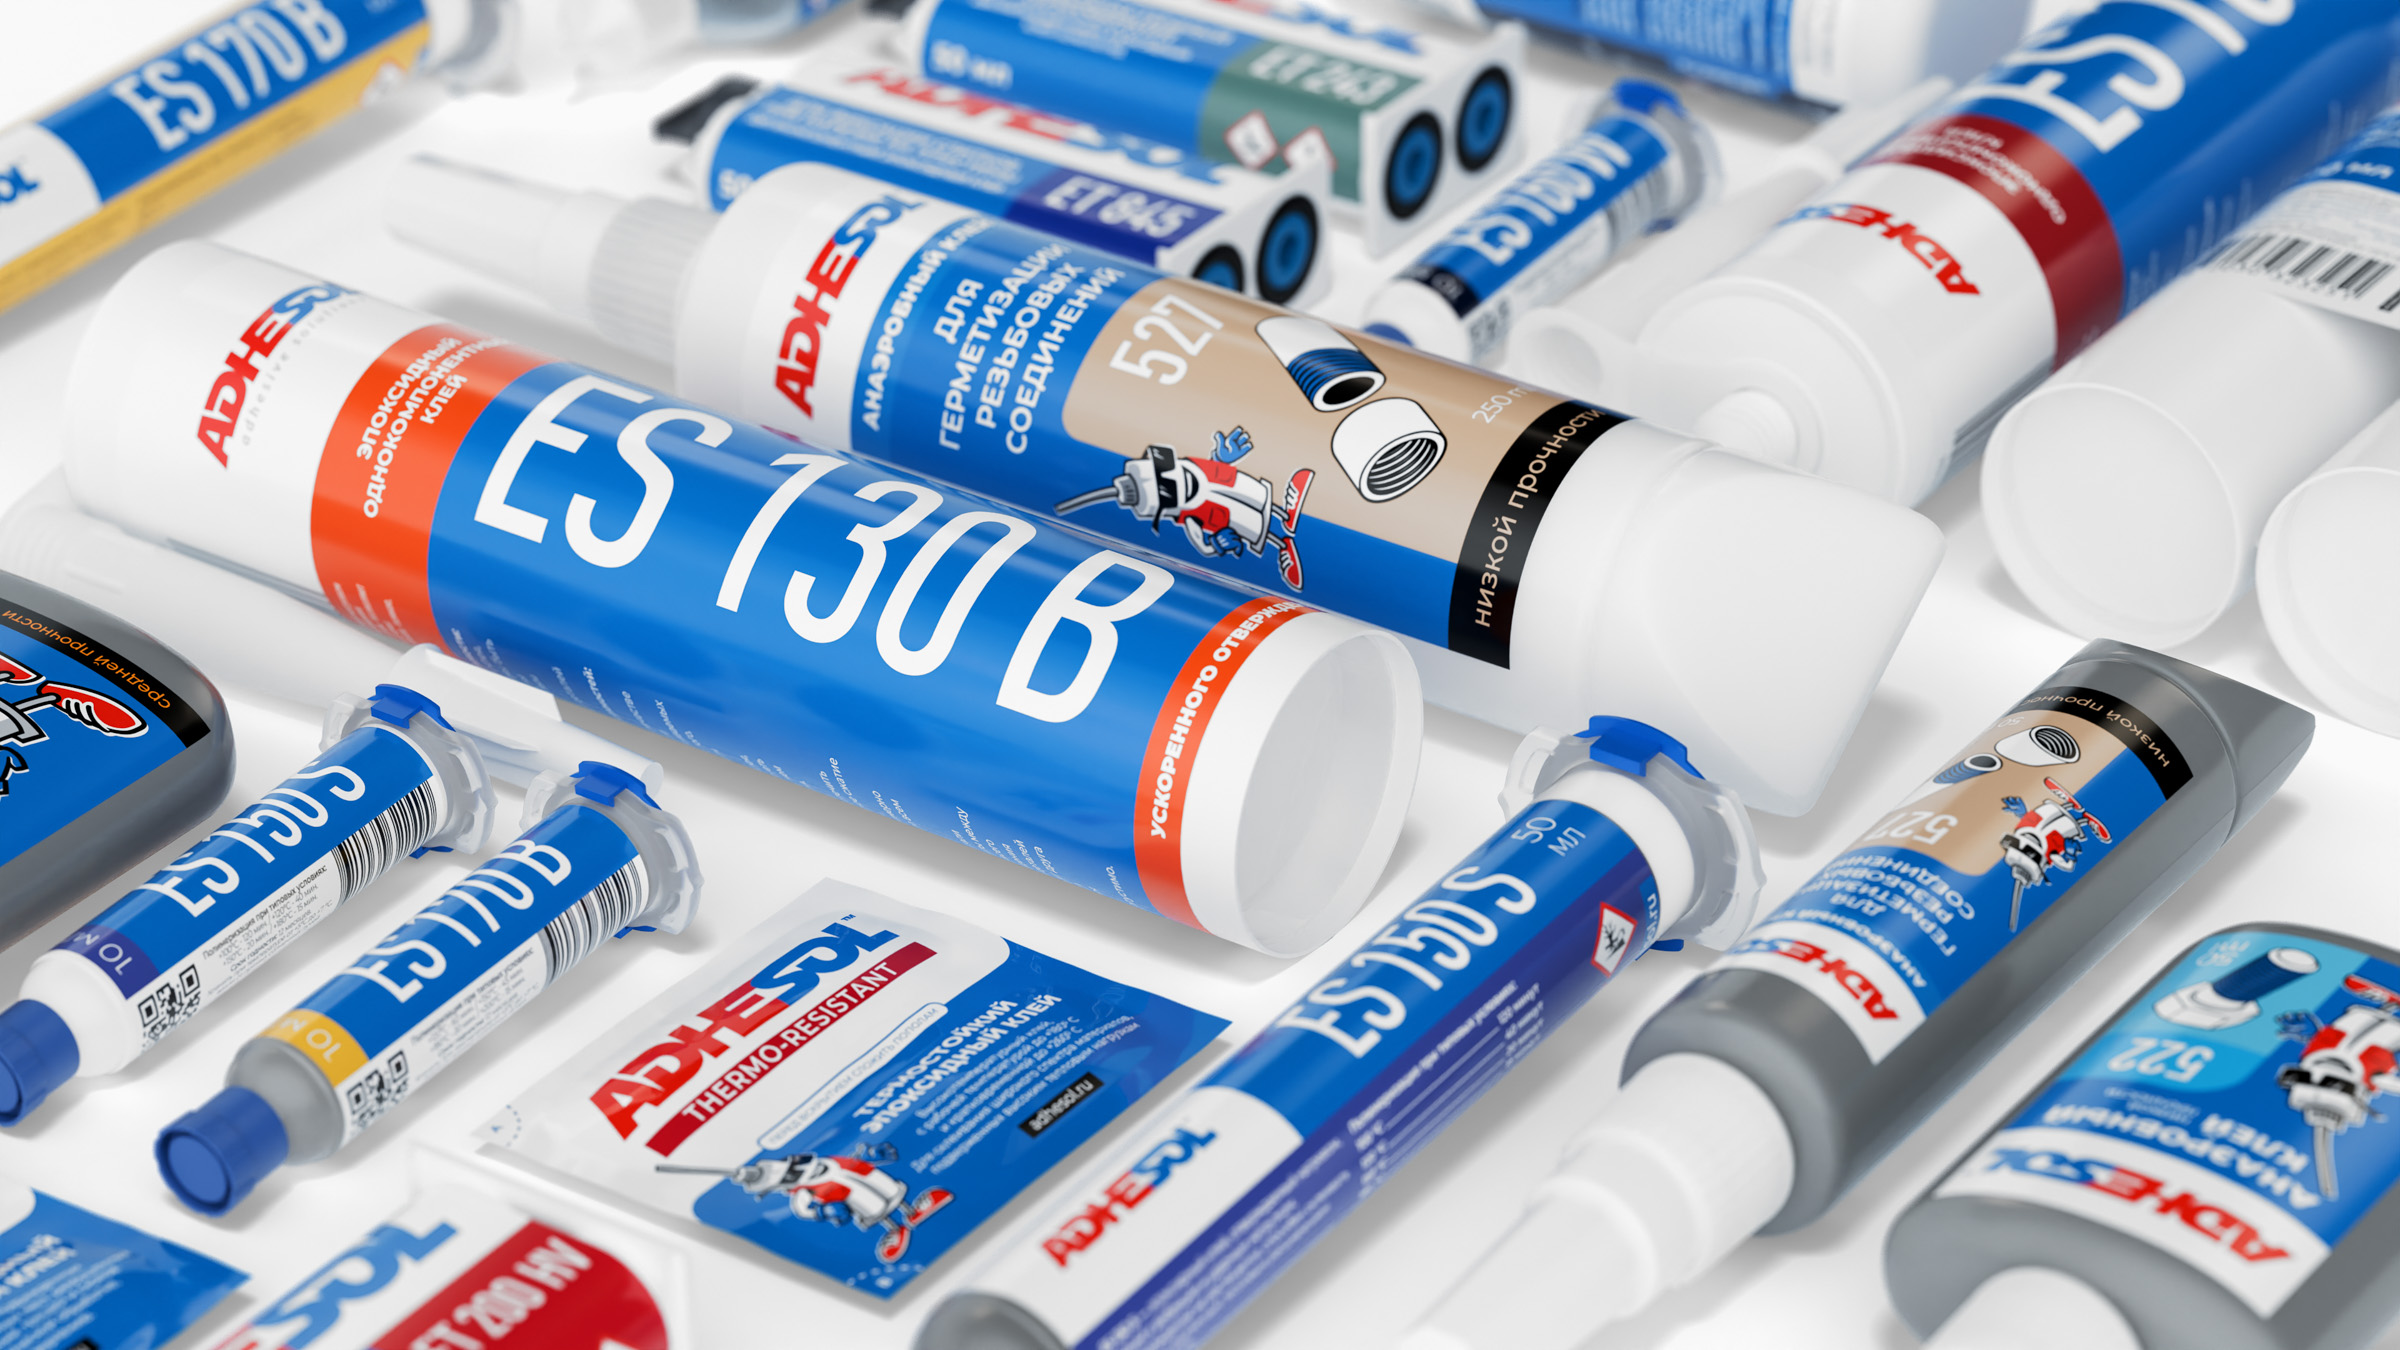 Design Development for Adhesive Solutions Brand Adhesol by Cuba Branding